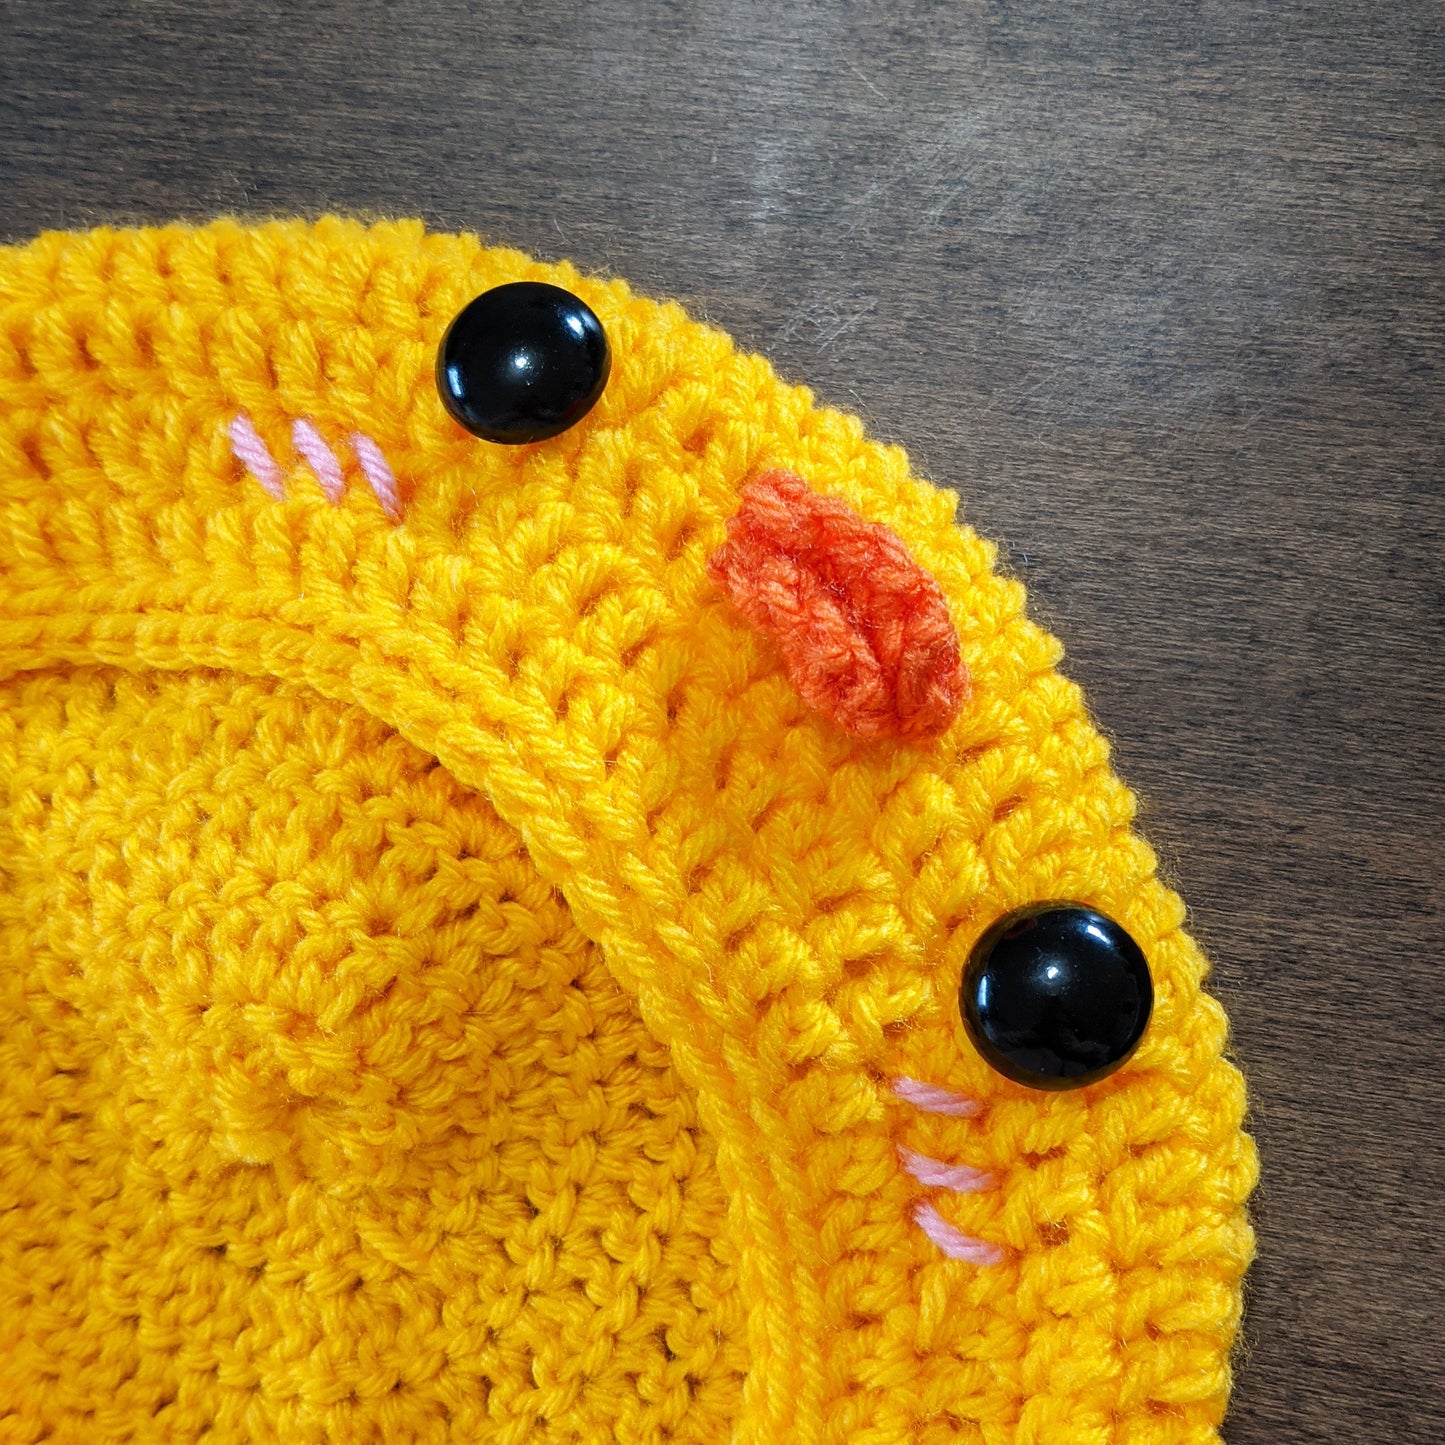 Kawaii Ducky Beret - Hand crocheted and designed hat - Sample Sale